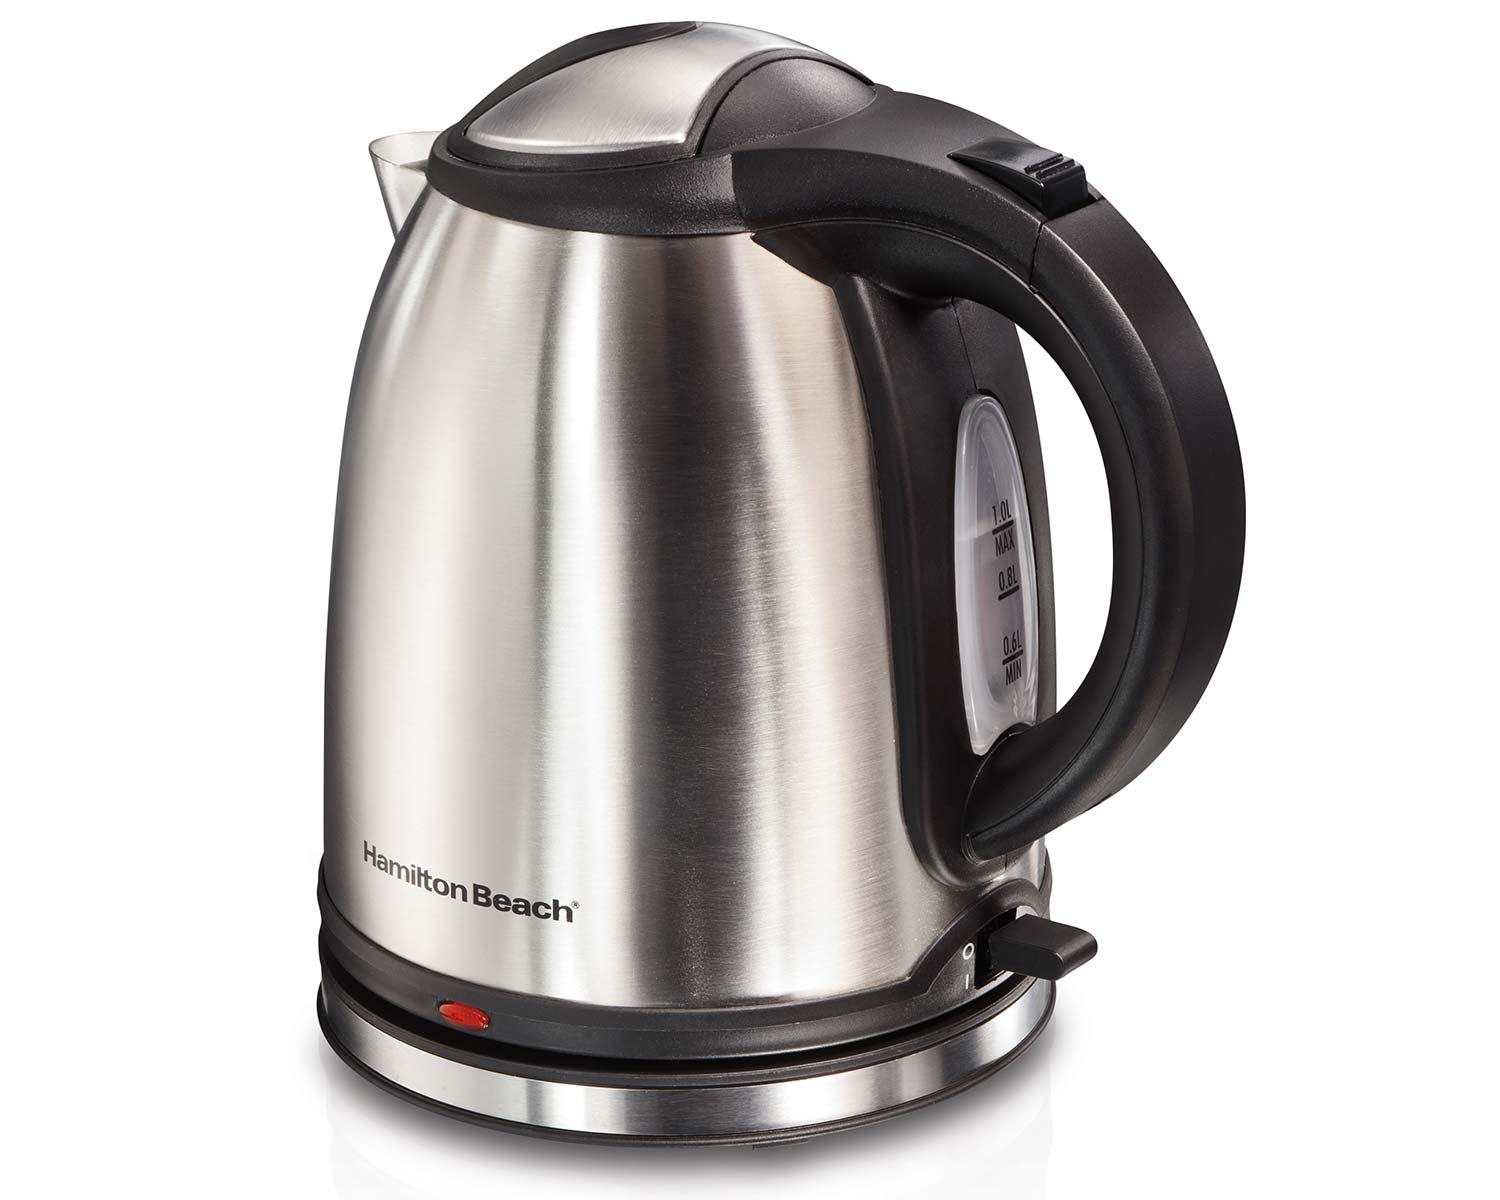 1 Liter Stainless Steel Electric Kettle (40995)